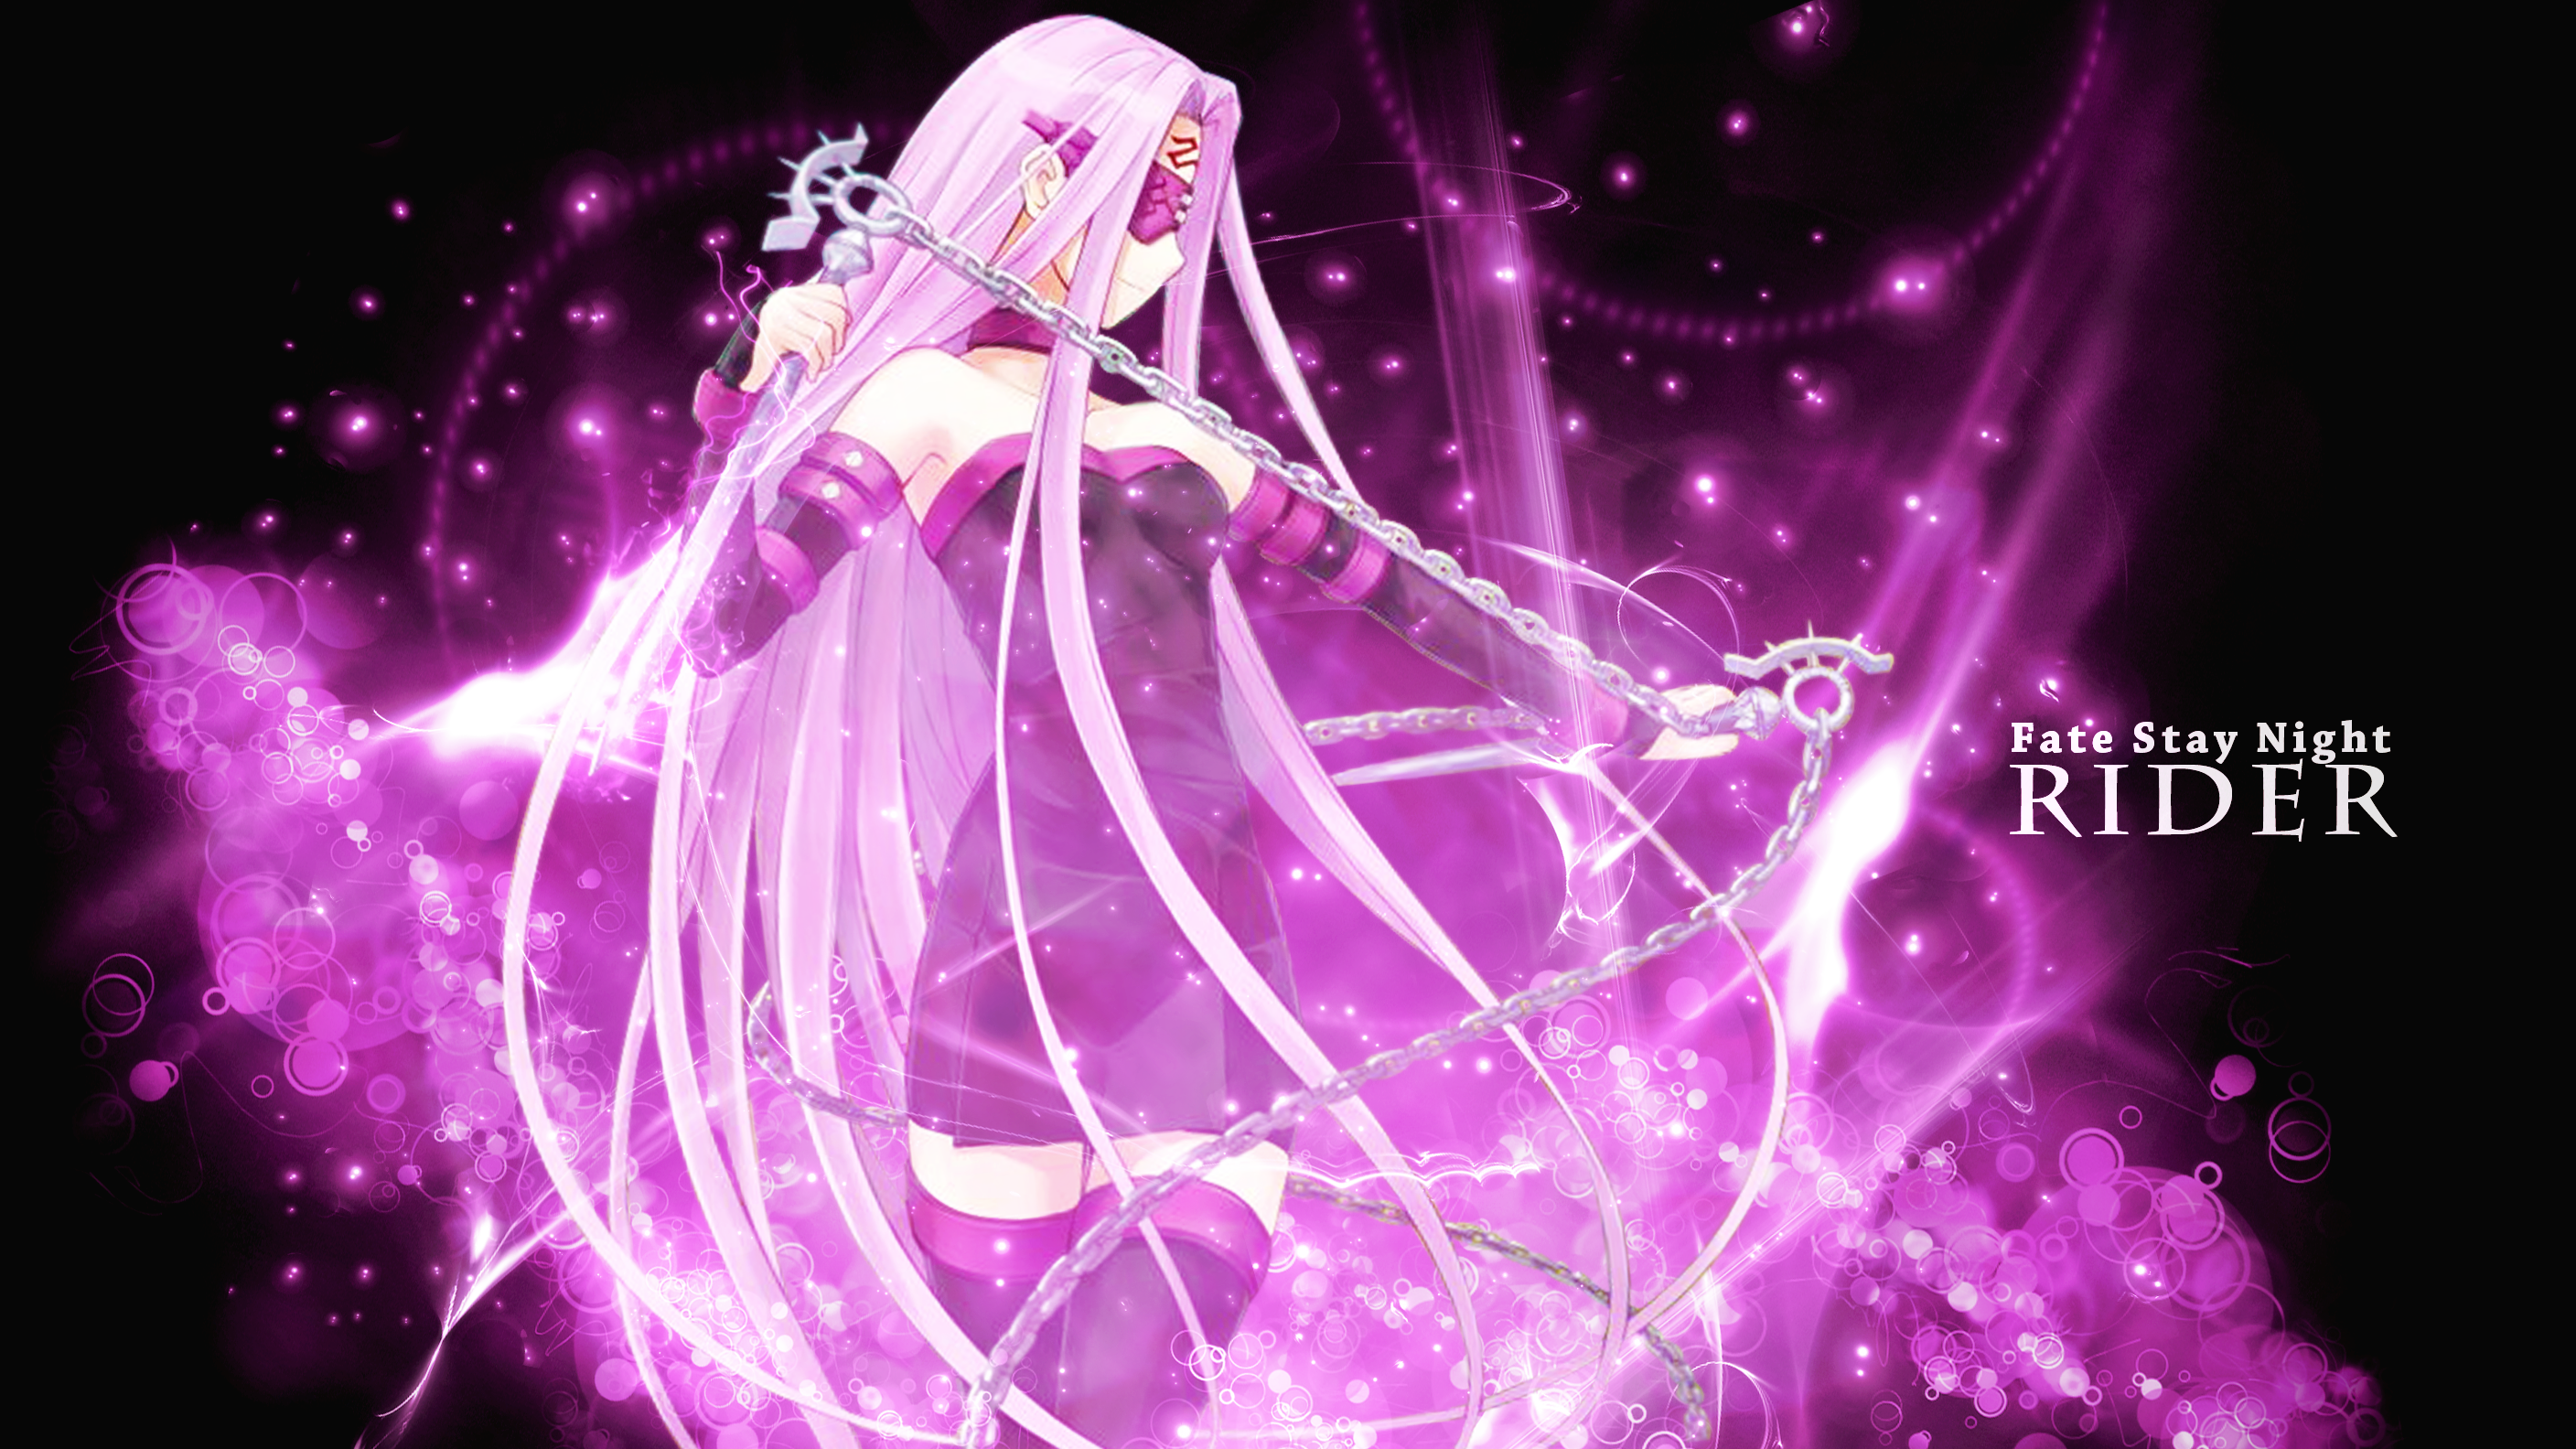 Rider #Medusa #Fate_Stay_Night #Fate_Grand_Order #Stocking #Pink_Hair #Pink_Eye #Anime #Chain #Black_Dress. Fate stay night, Stay night, Fate